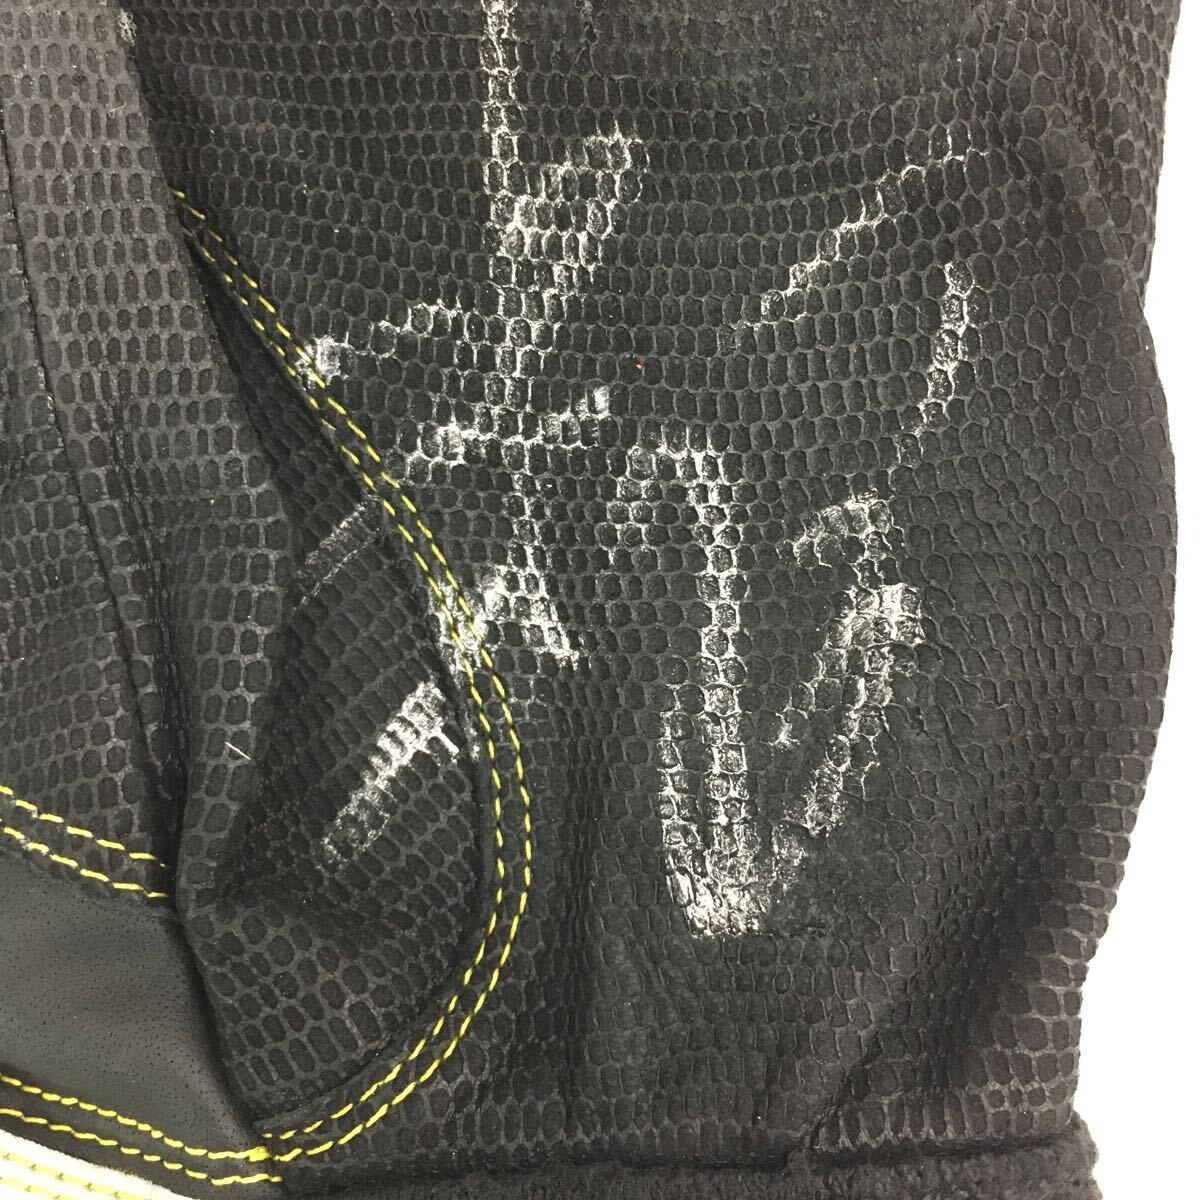 H-3810 Fukuoka SoftBank Hawks close wistaria .. player autographed batting glove both hand composition lamp . there is a certificate, Mizuno gloves baseball used 